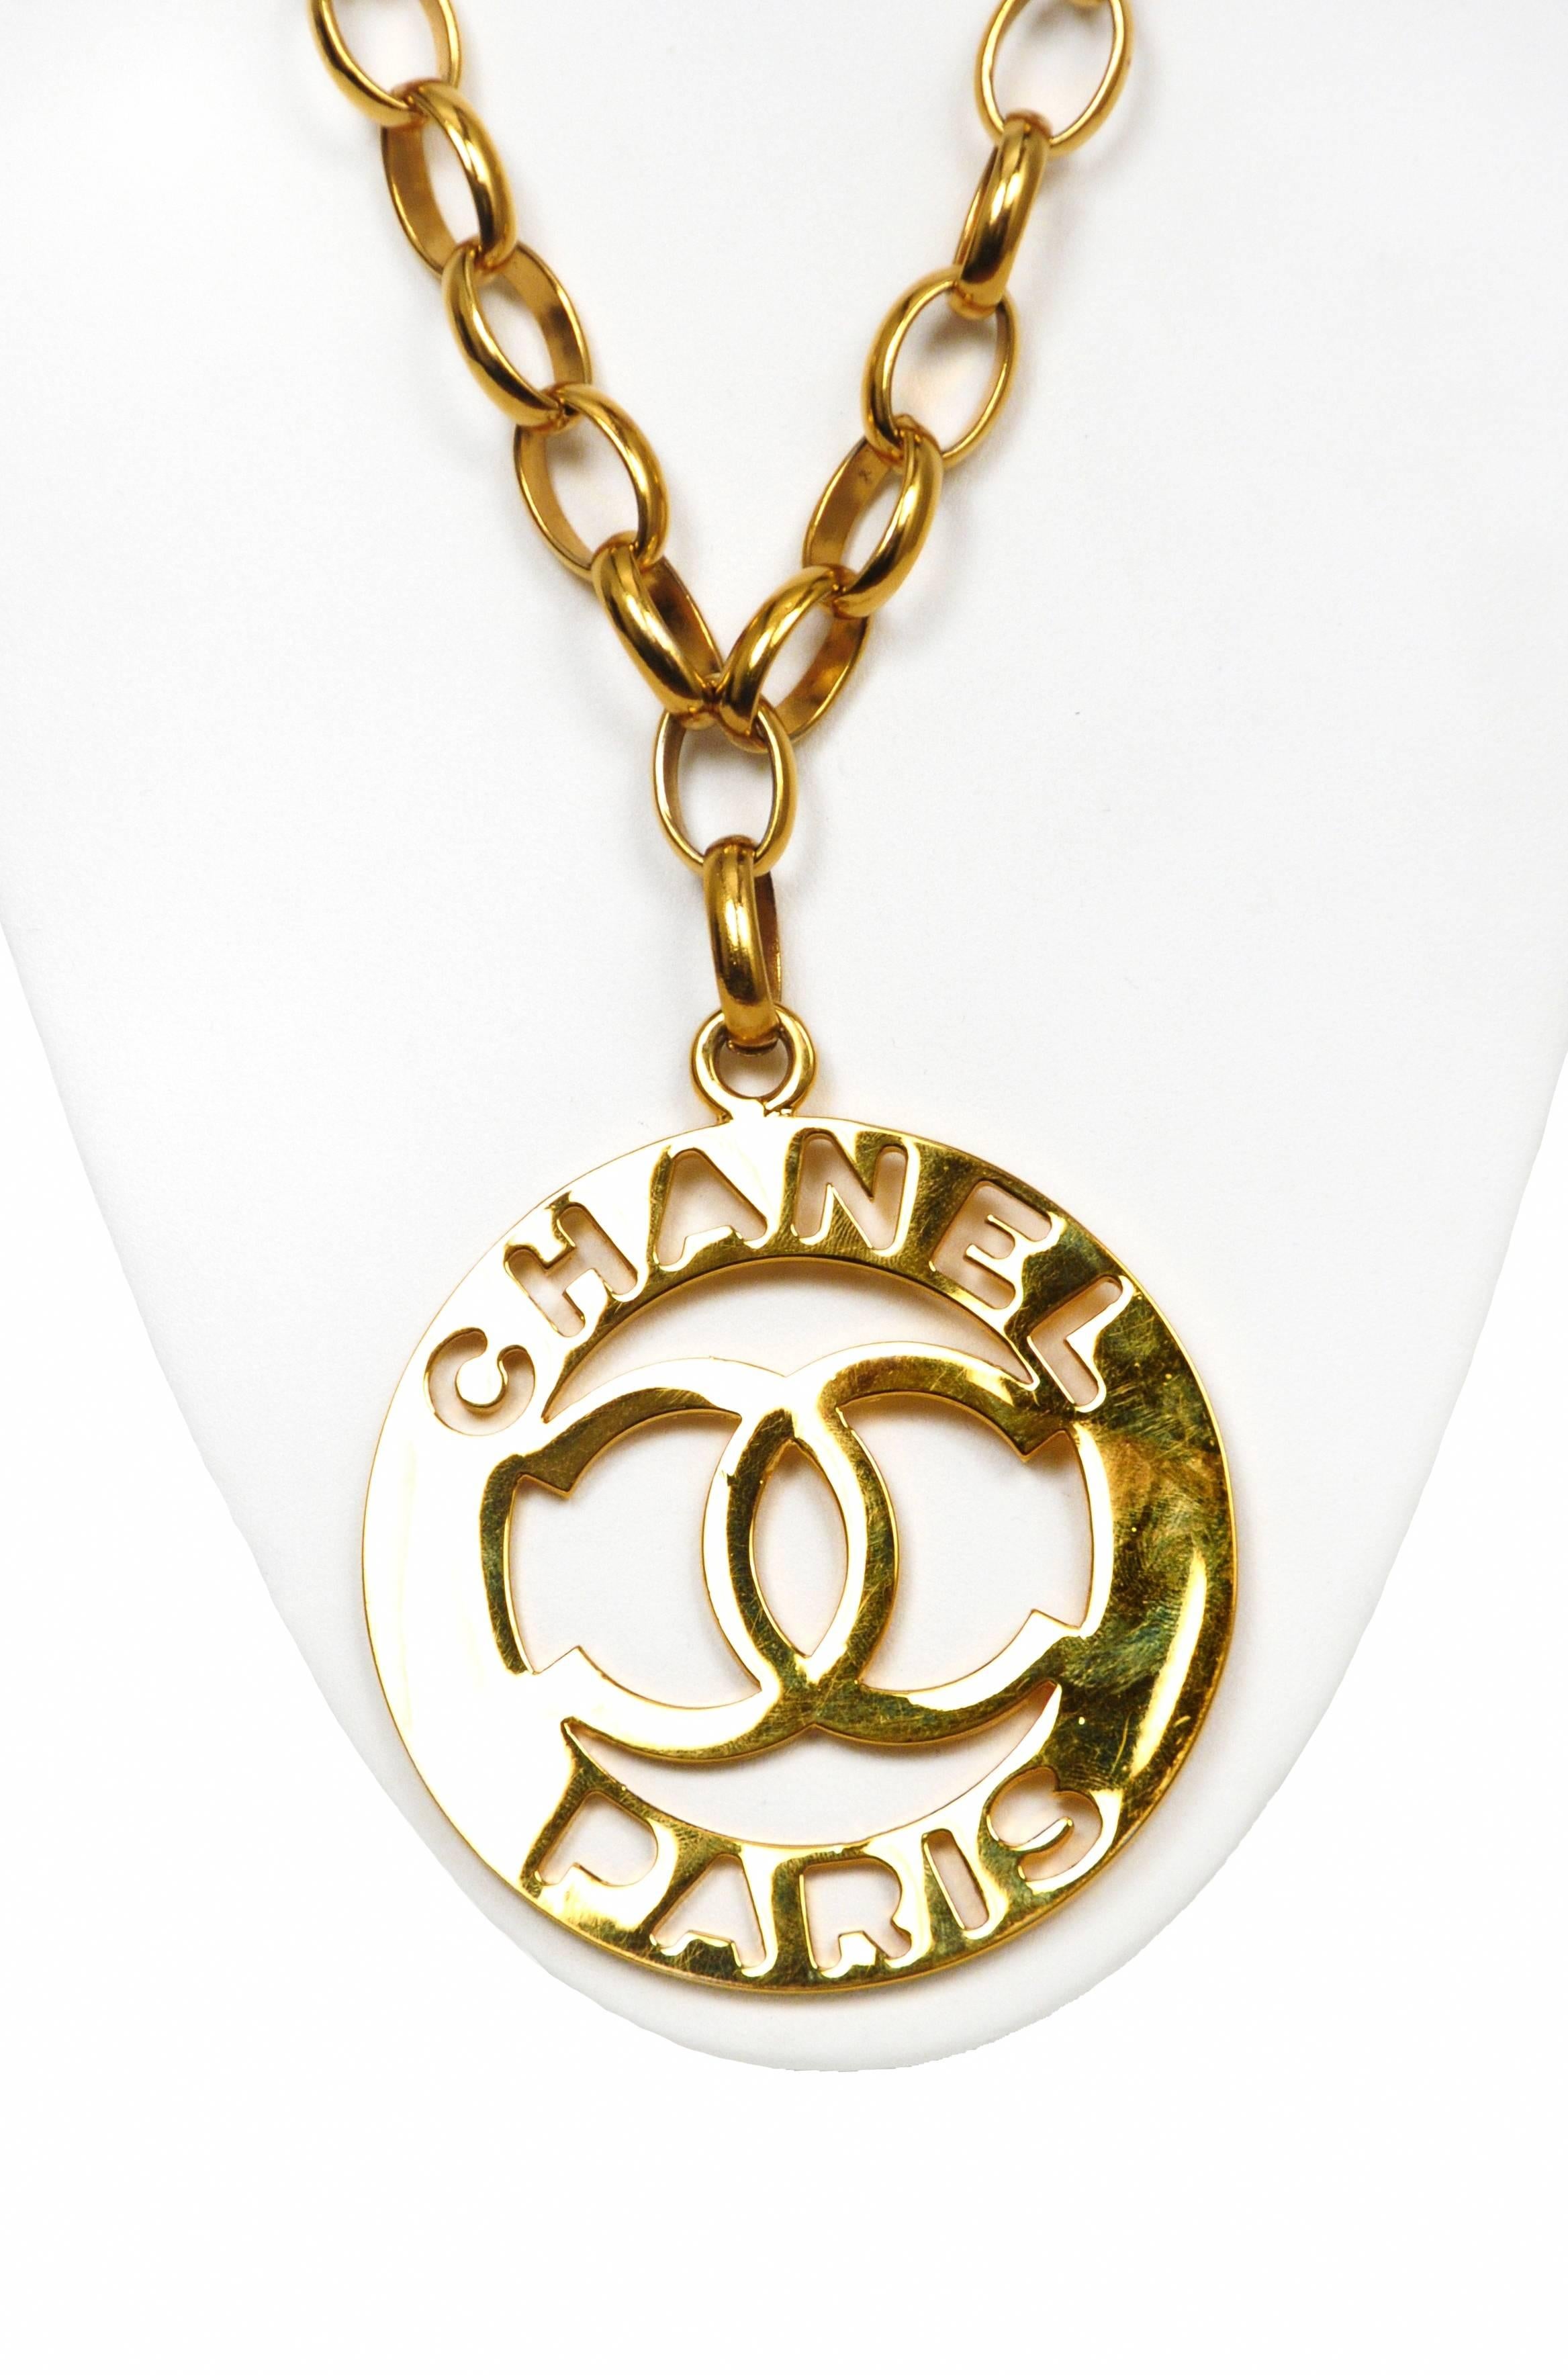 Vintage gold tone chain featuring a cutout medallion reading CHANEL PARIS with interlocking CC's in the center. 